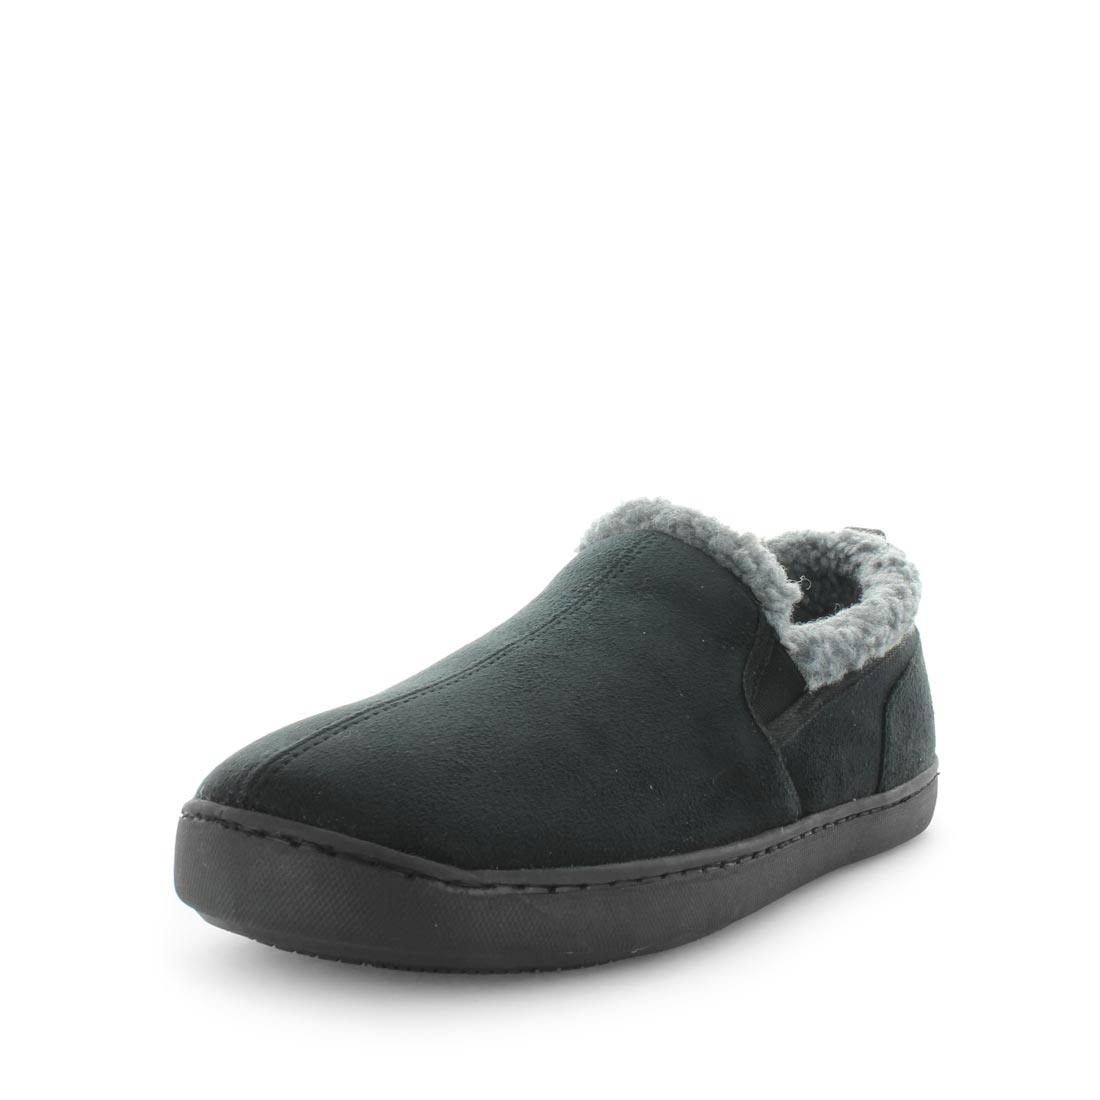 Load image into Gallery viewer, Classic mens slipper, Eliu by panda slippers. A black slip on style slipper with soft materials and comfy fit design for indoor wear. Showing a faux fur trimming and a non slip sole.x
